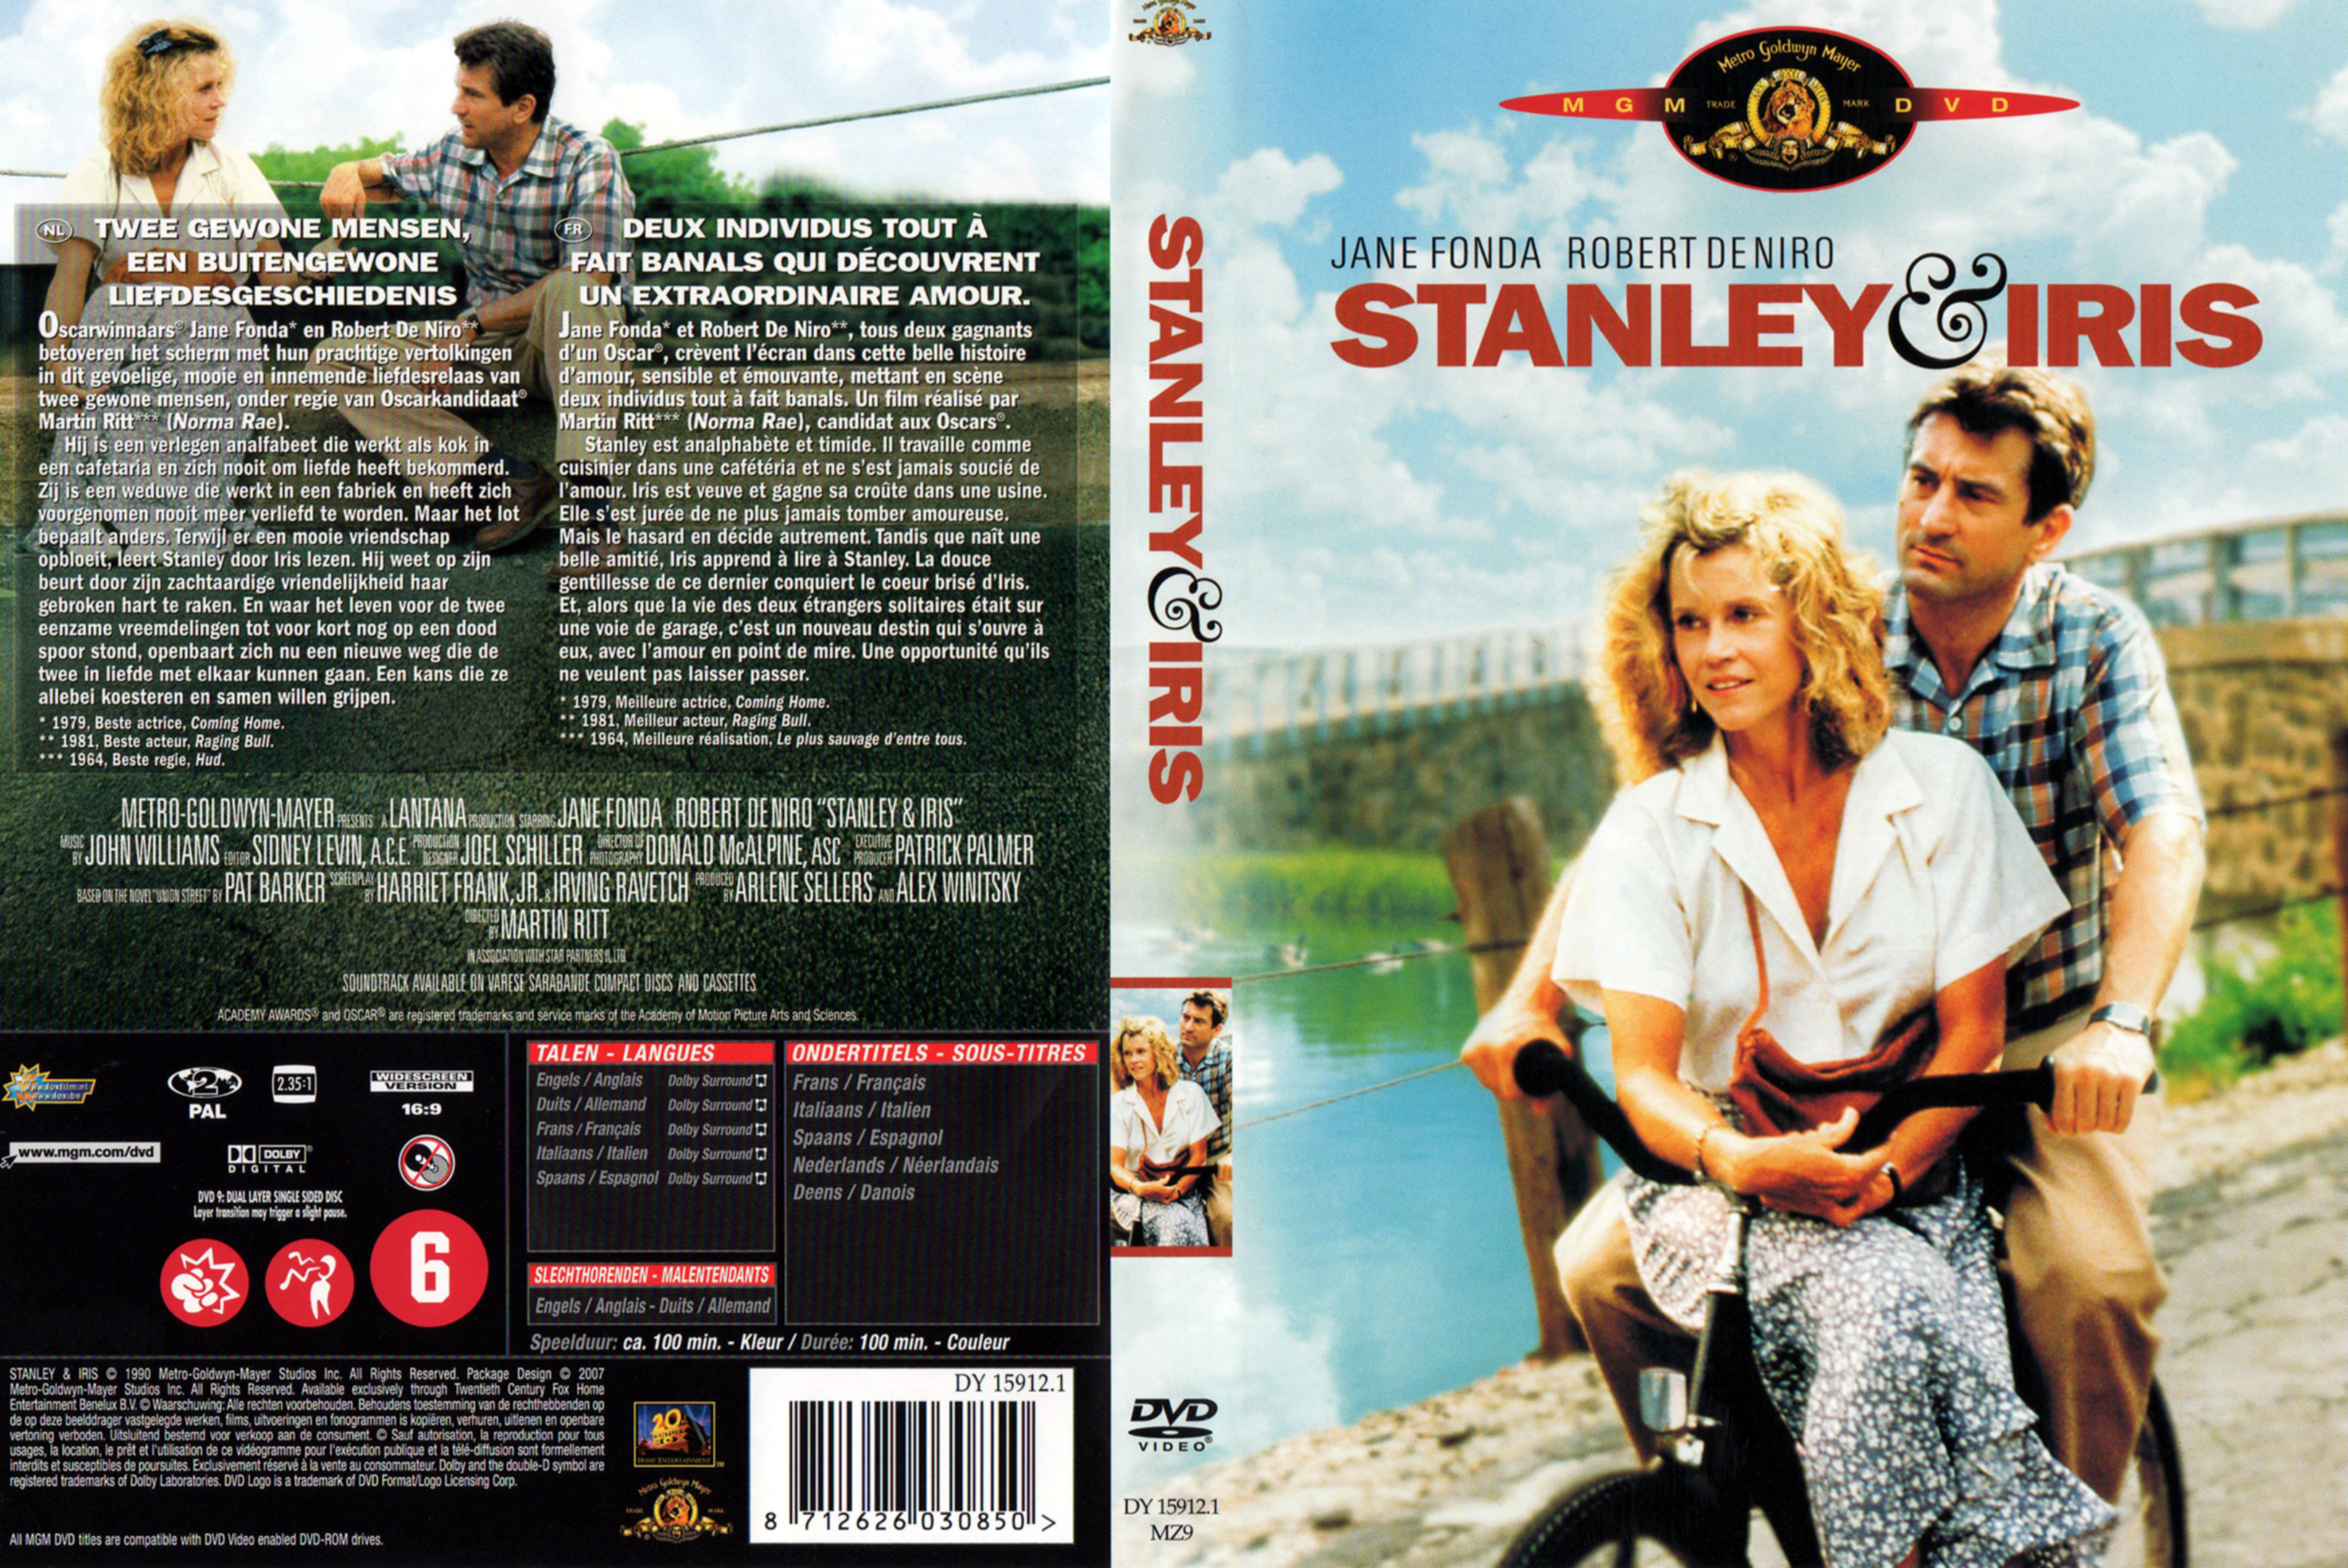 Jaquette DVD Stanley and Iris